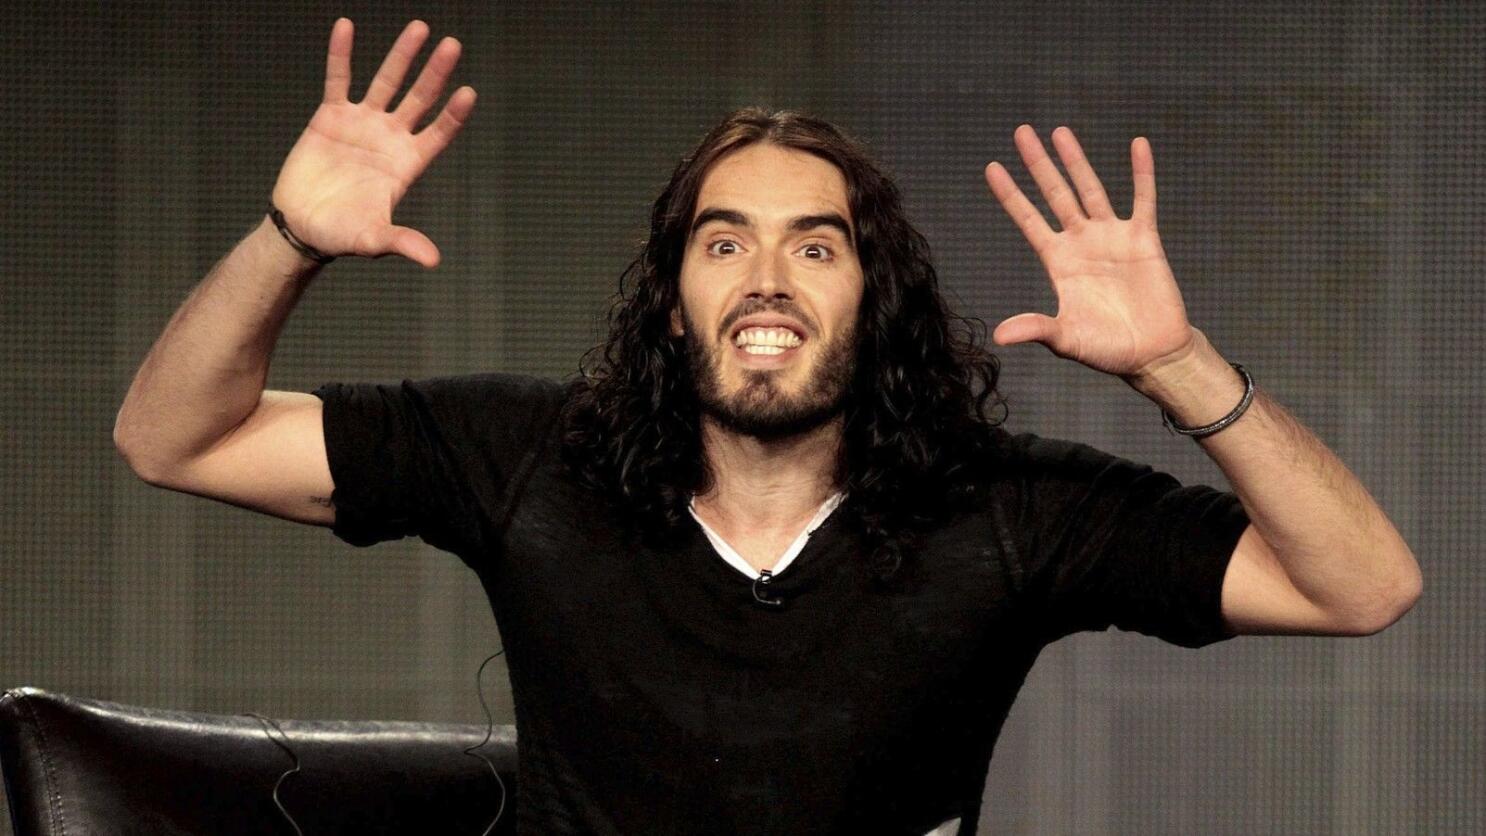 Russell Brand – Recovery: Freedom from Our Addictions